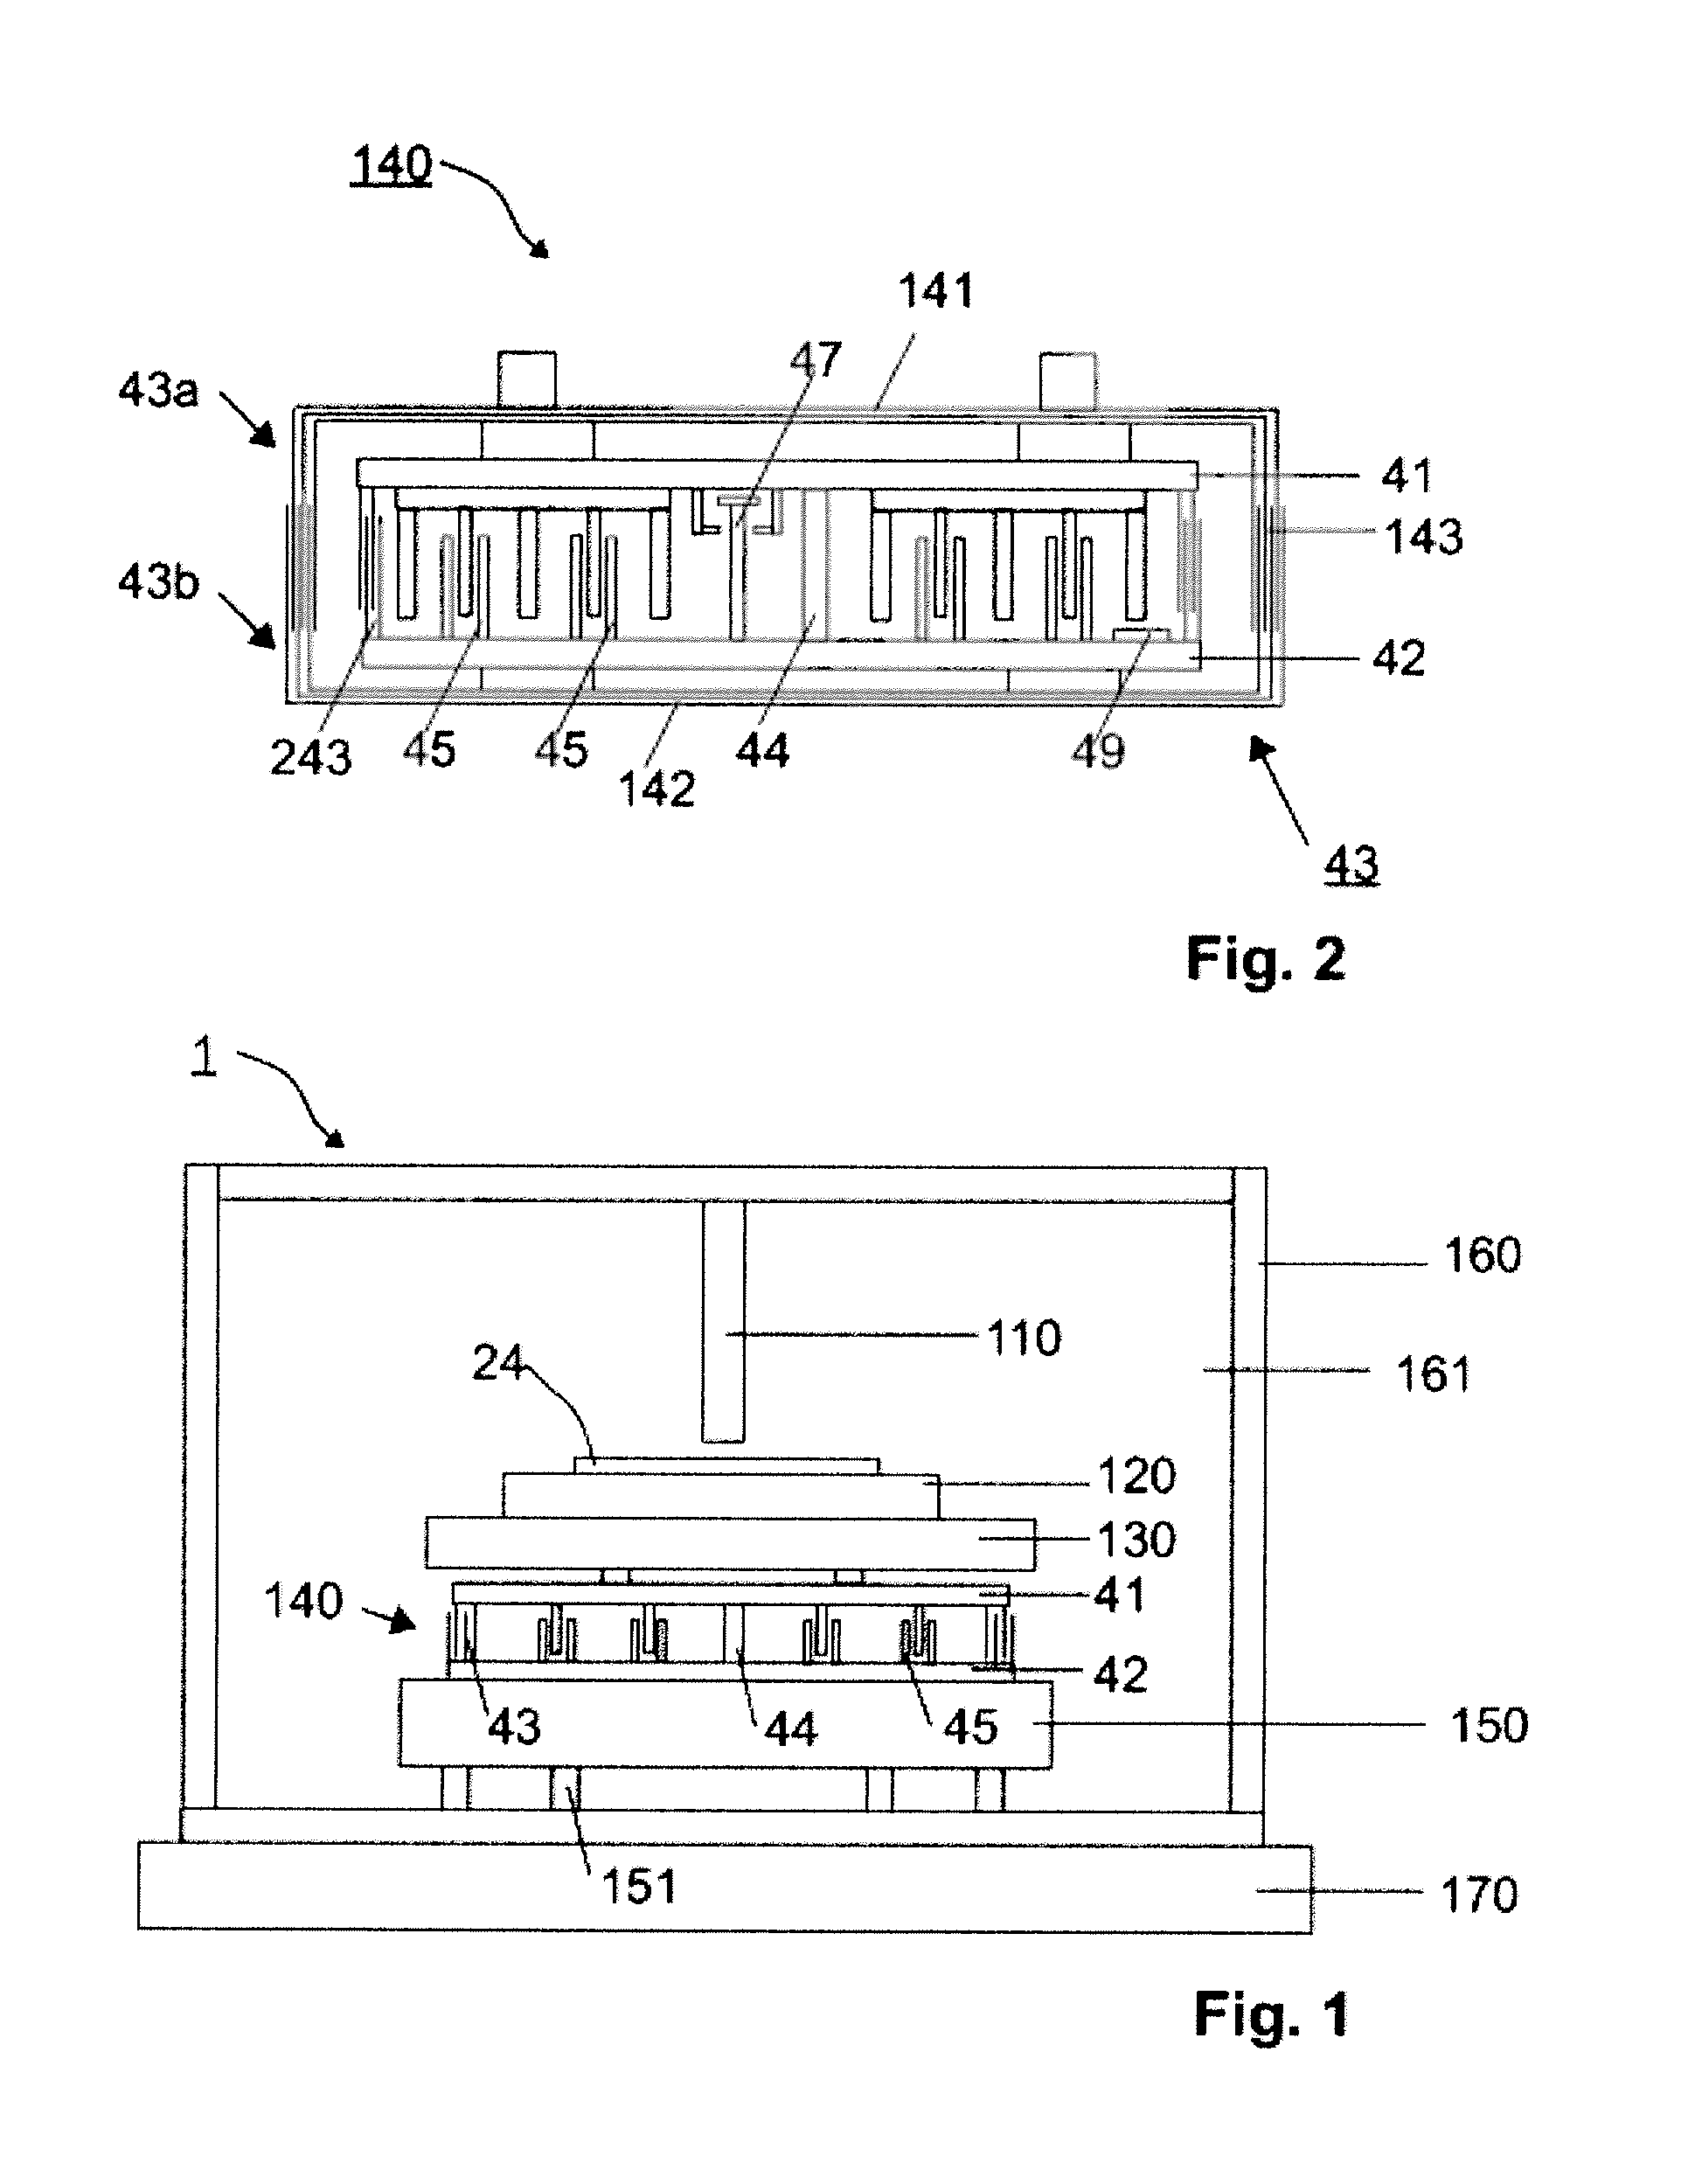 Support and positioning structure, semiconductor equipment system and method for positioning